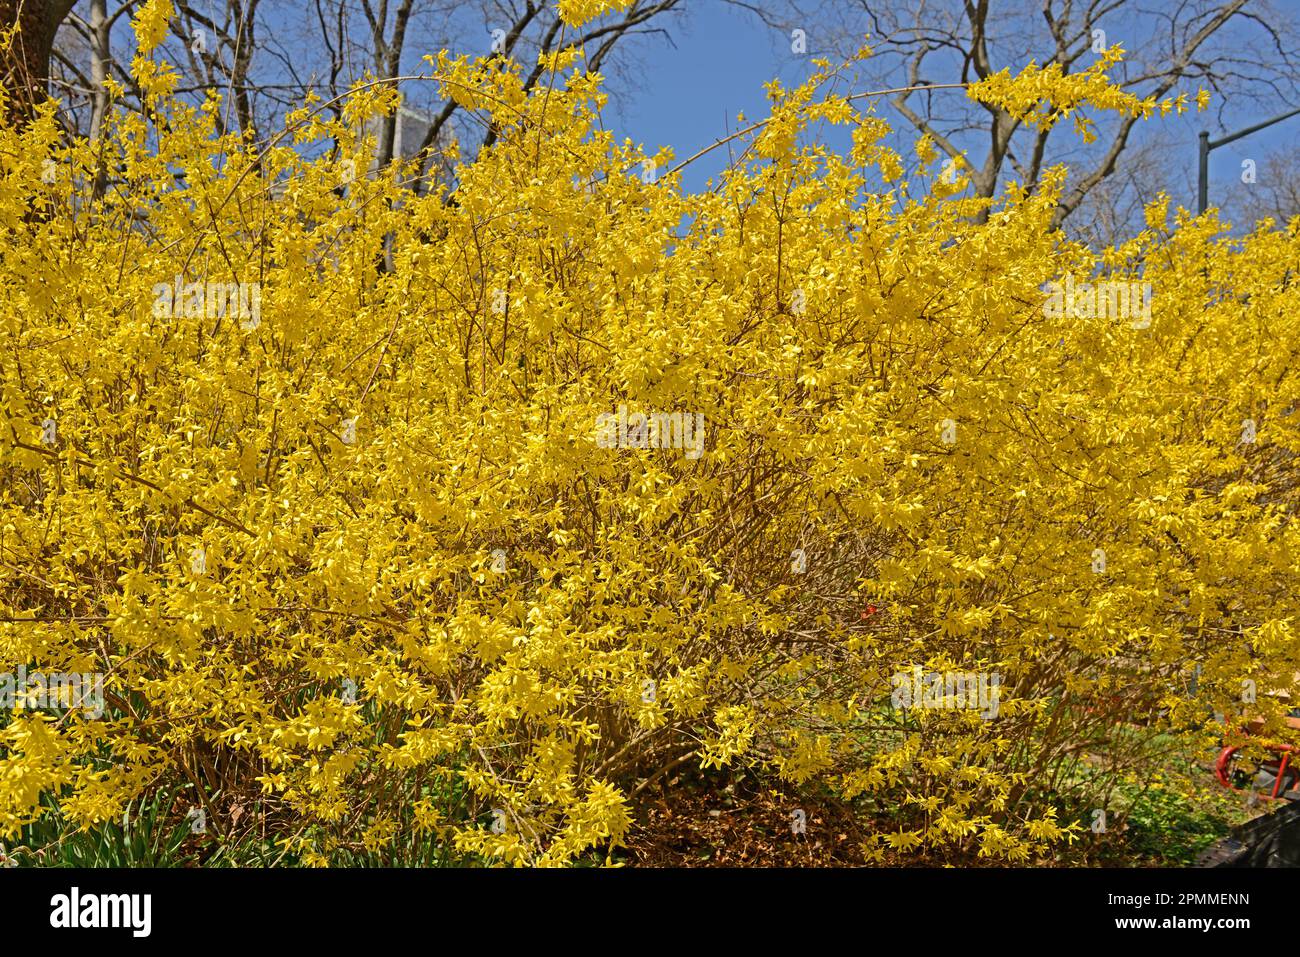 Forsythia, genus of flowering plans in olive family Oleaceae, in Central Park on spring bright day. New York City Stock Photo